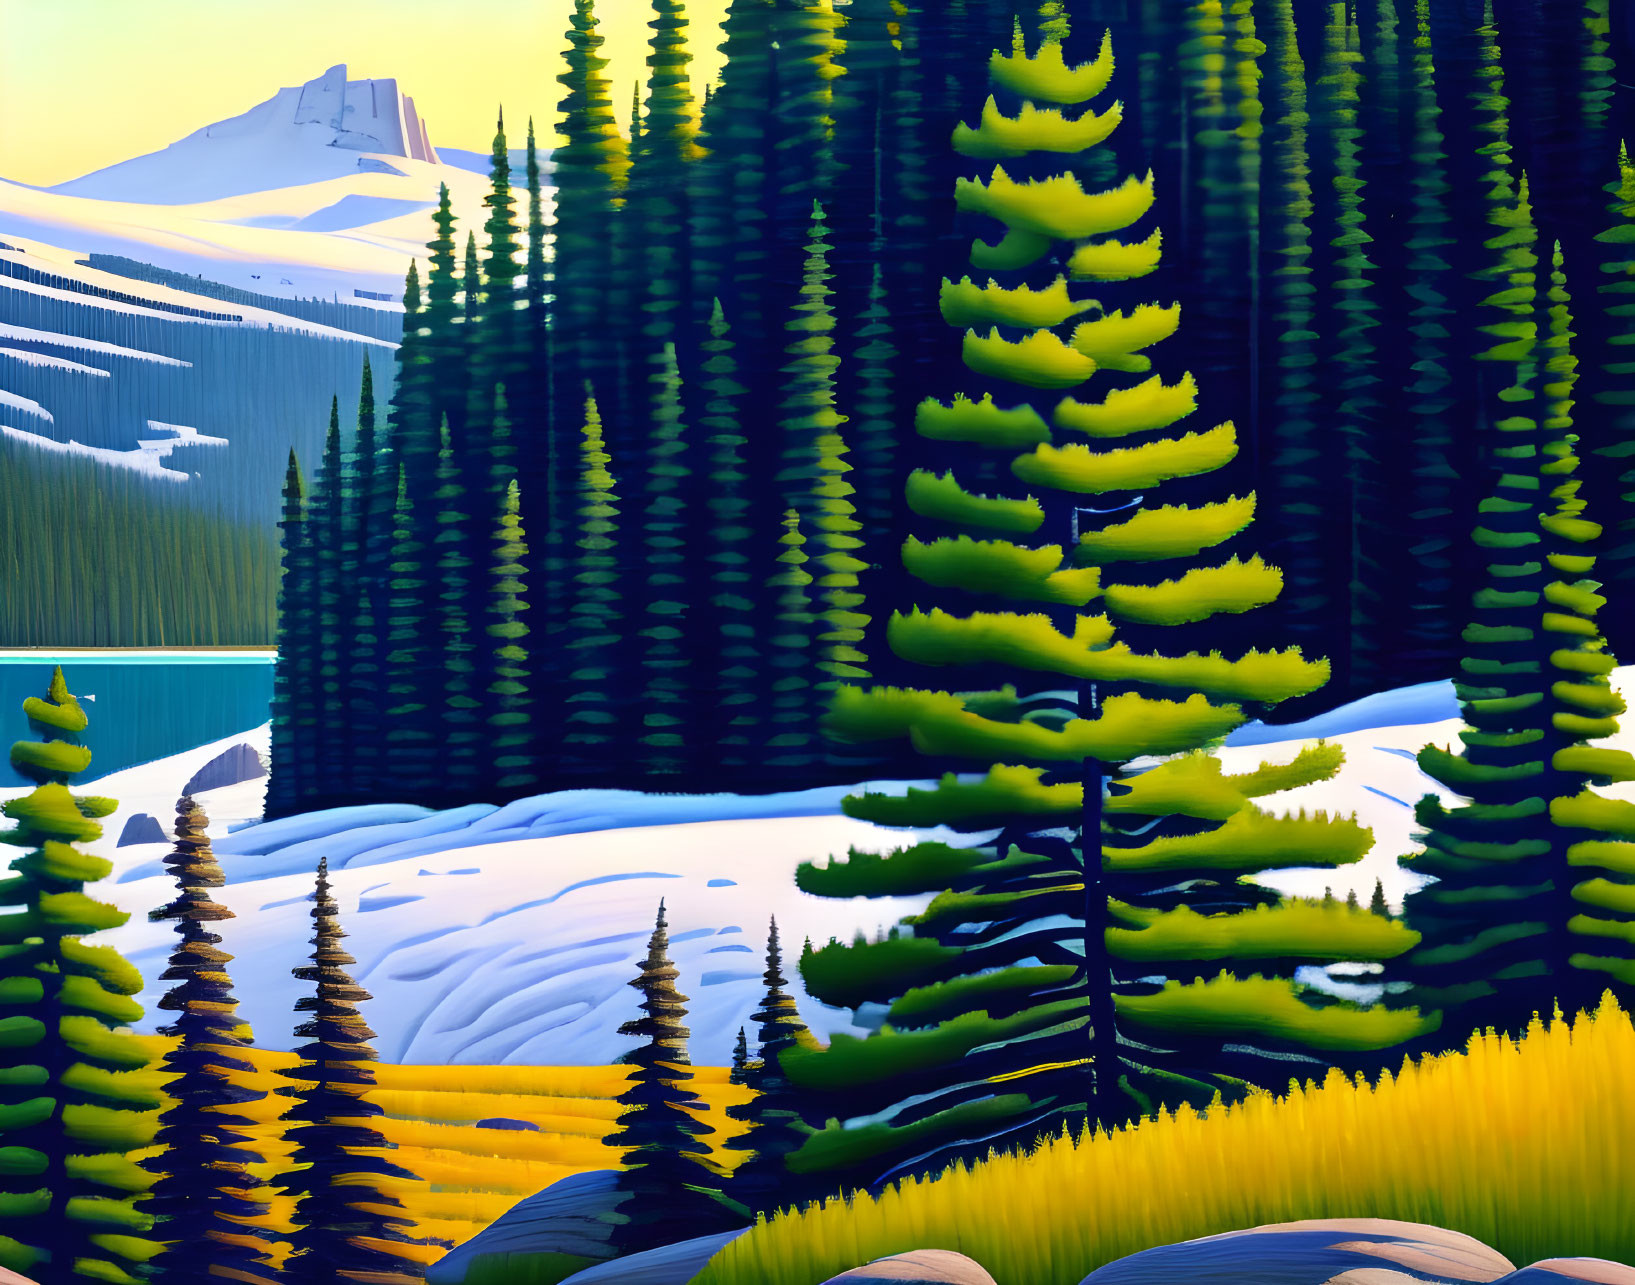 Colorful Pine Forest Digital Artwork with Snowy Mountains